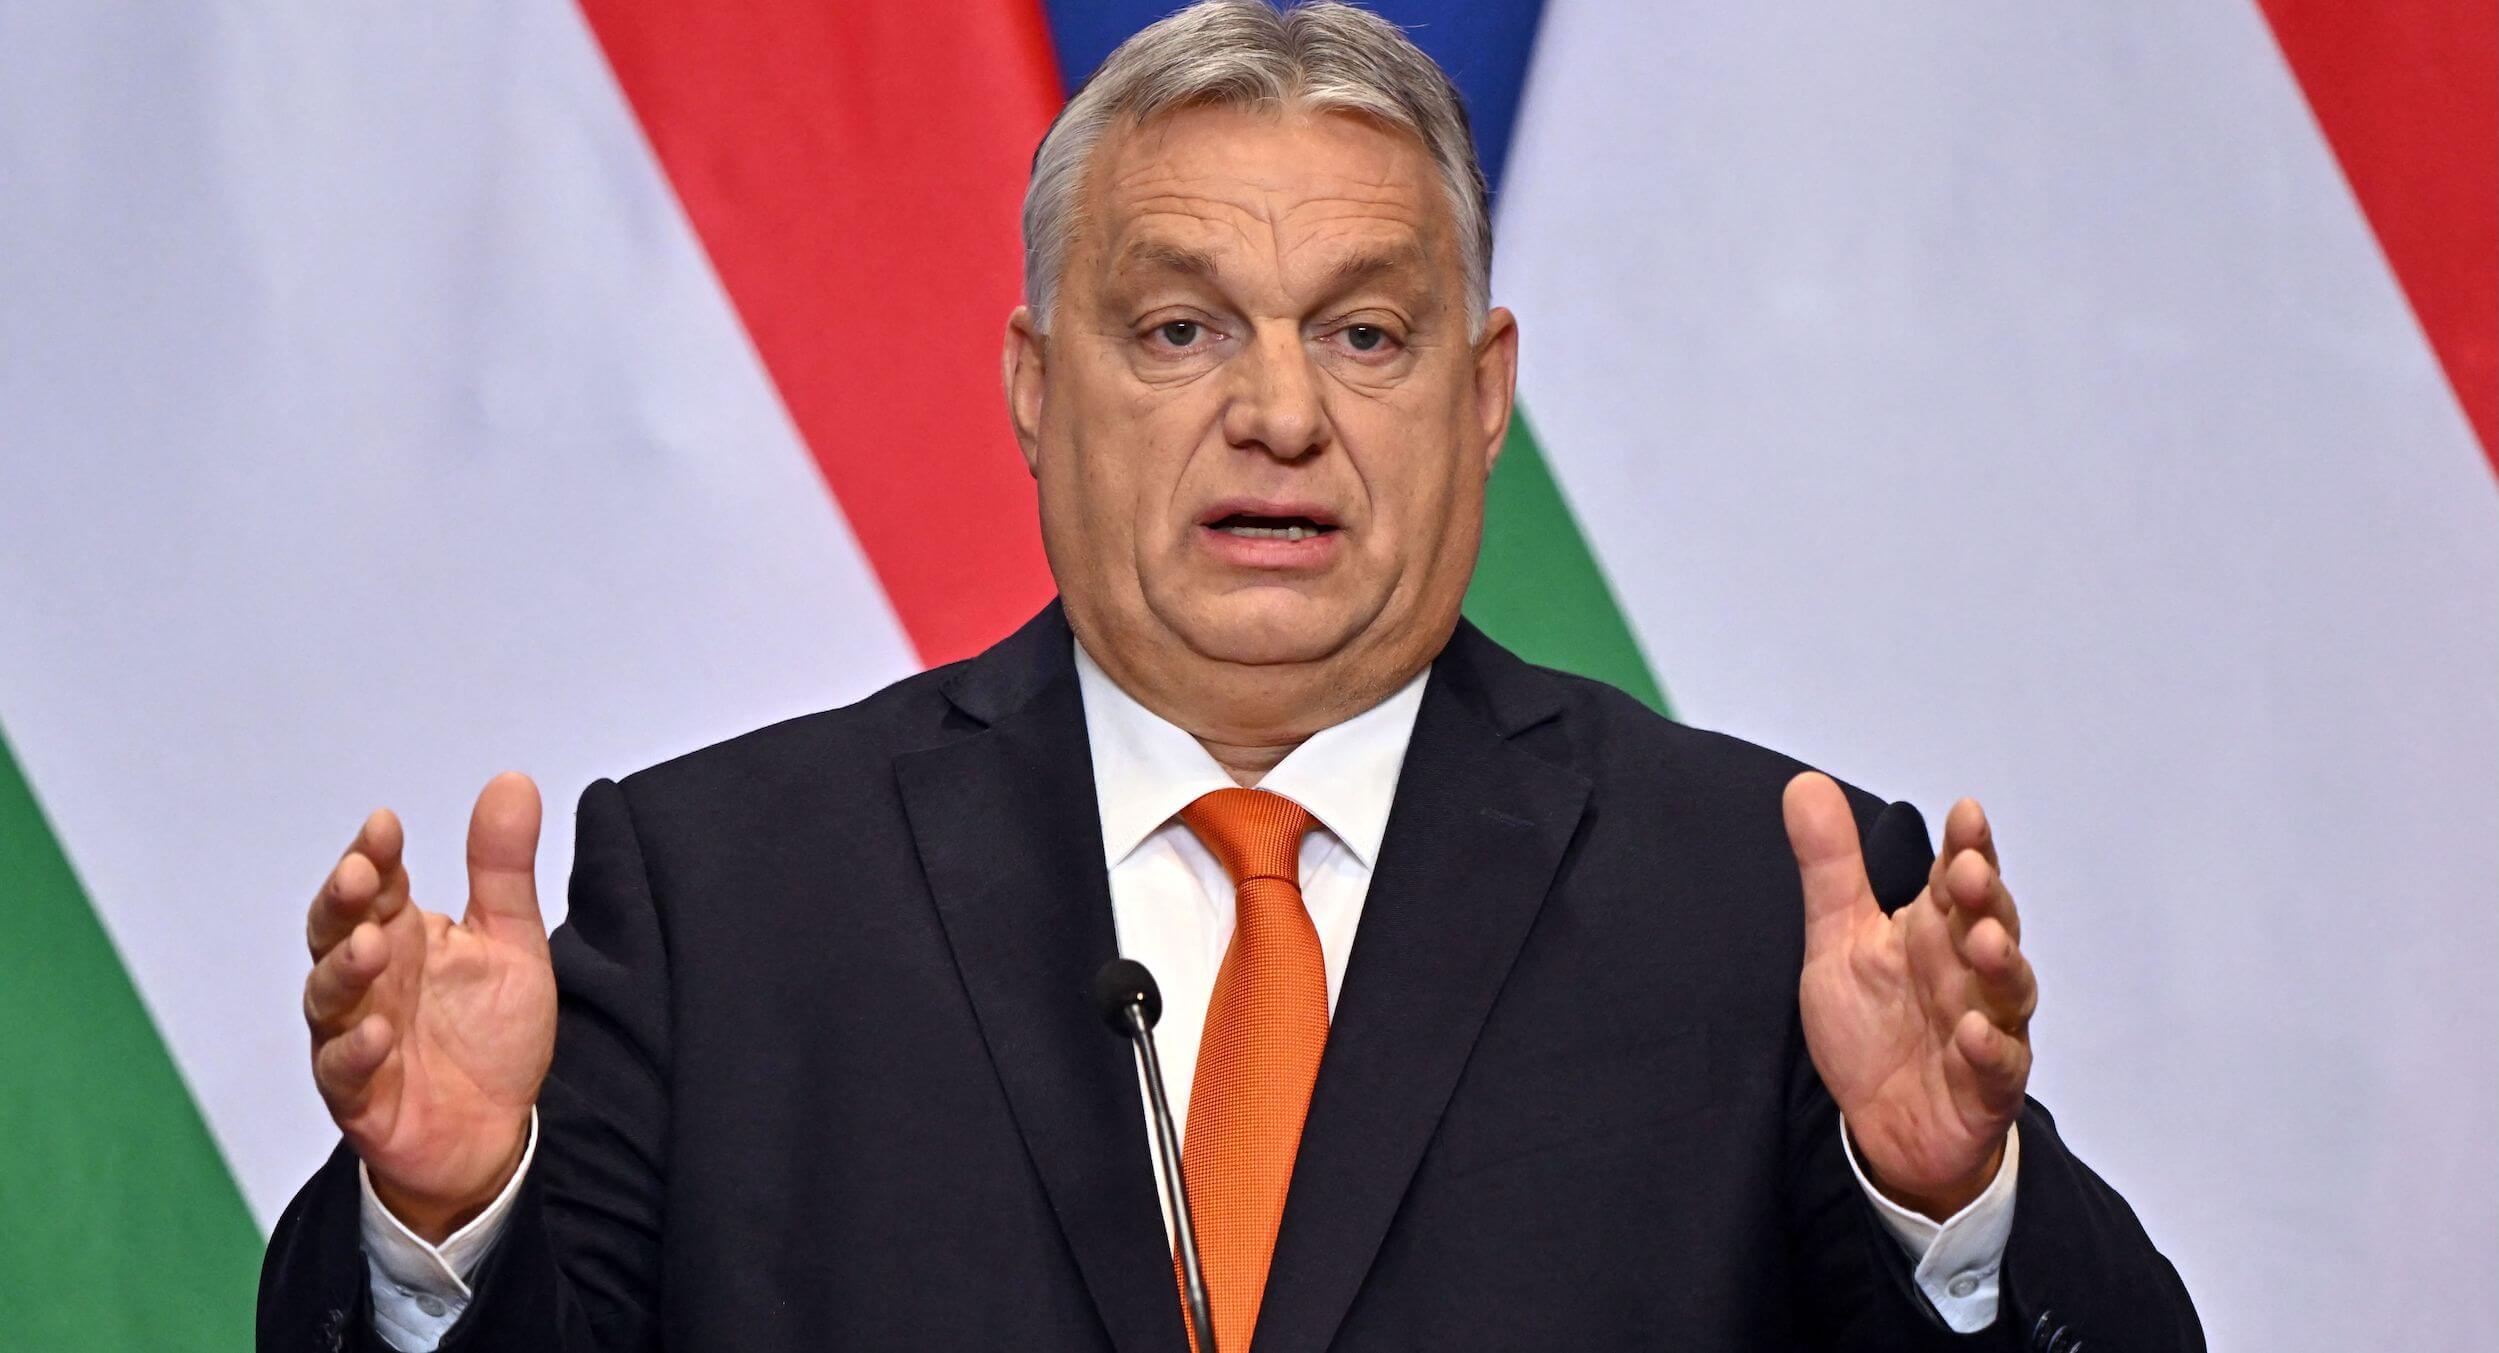 Embracing Hungary’s ‘Illiberalism’ as the Road to Peace › American Greatness